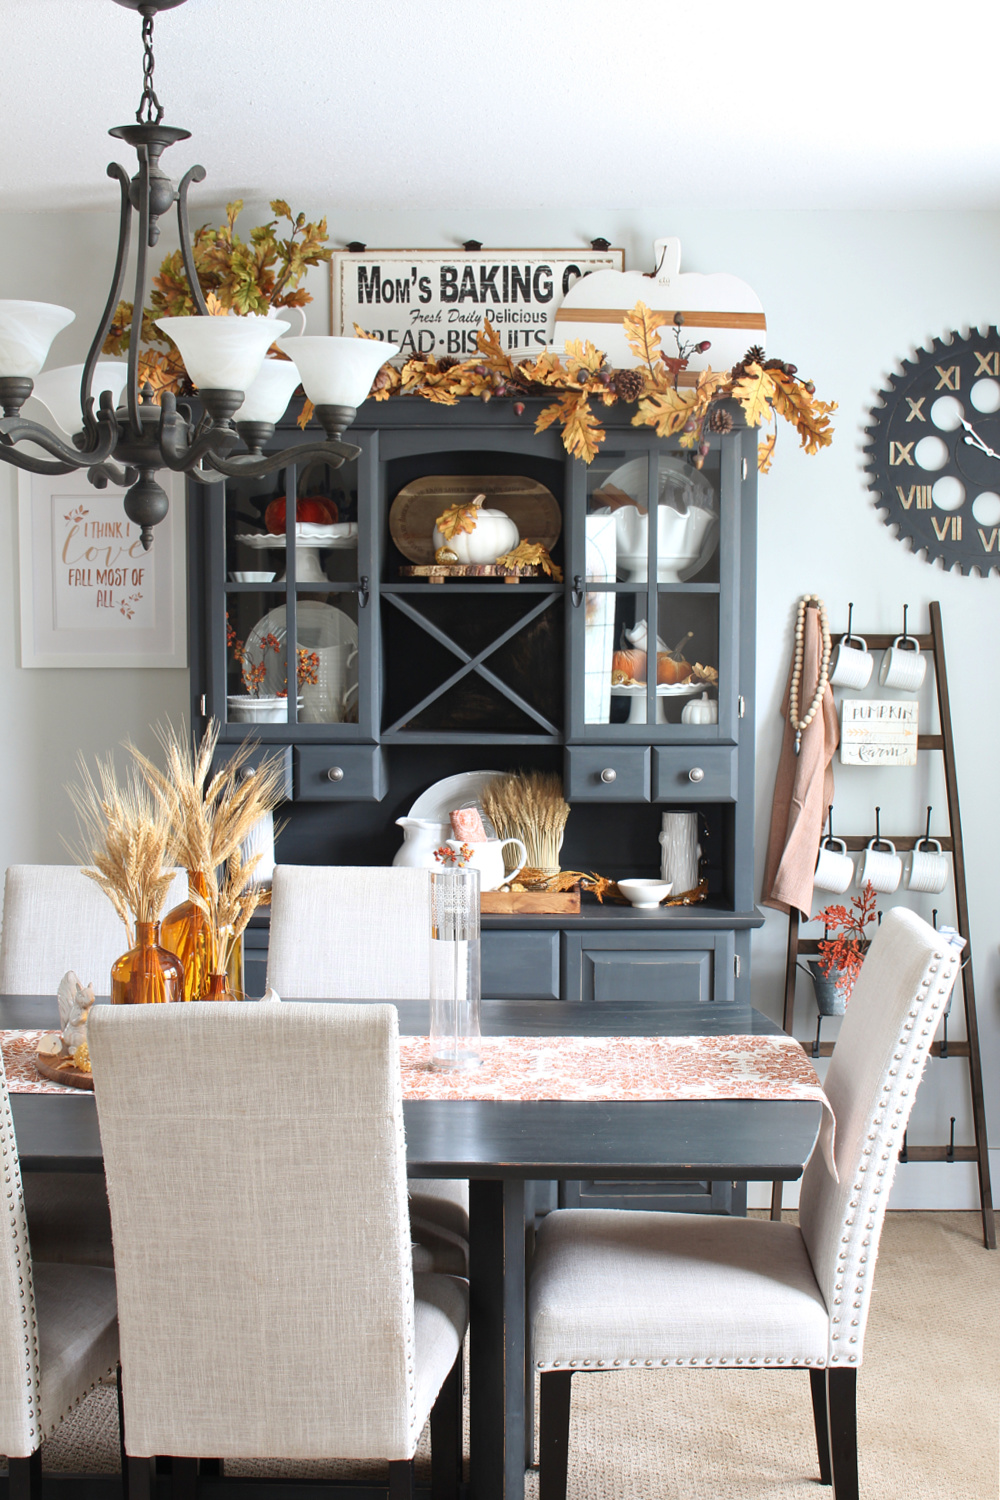 https://www.cleanandscentsible.com/wp-content/uploads/2021/09/fall-dining-room-decorating-Clean-and-Scentsible.jpg